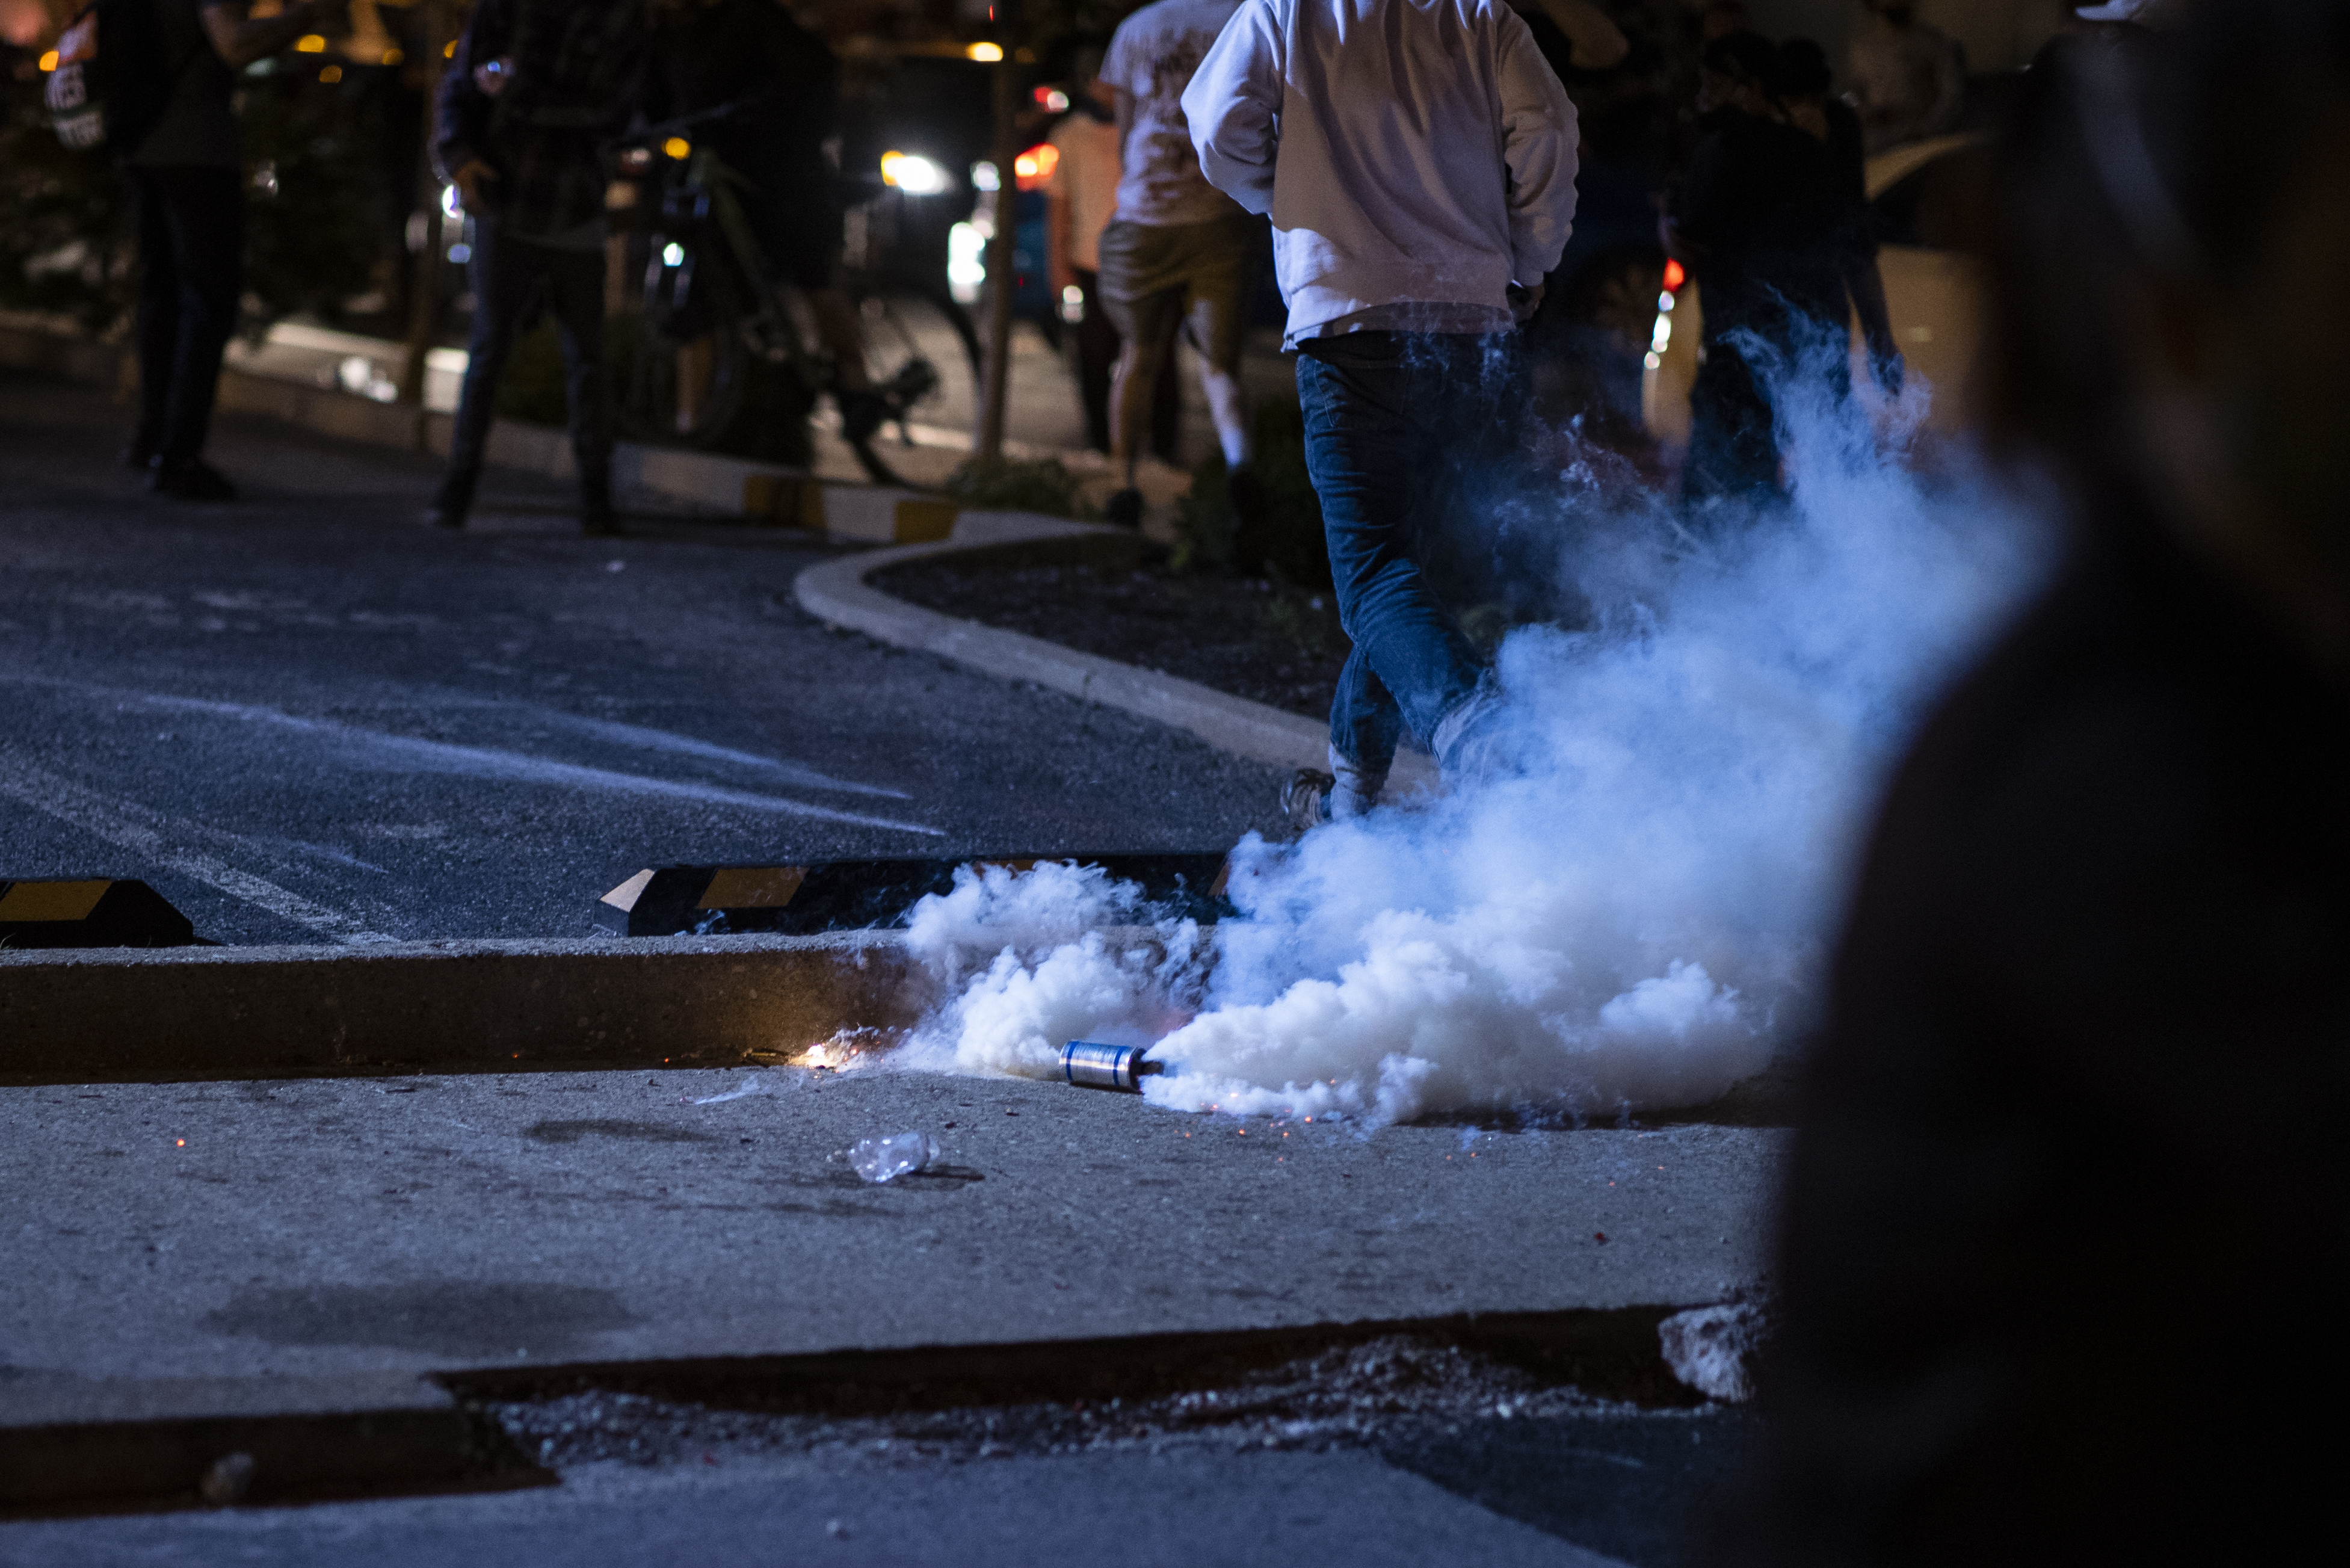 A tear gas canister erupts as protesters disperse on May 30, 2020 in Louisville, Kentucky. (Photo: Brett Carlsen/Getty Images)